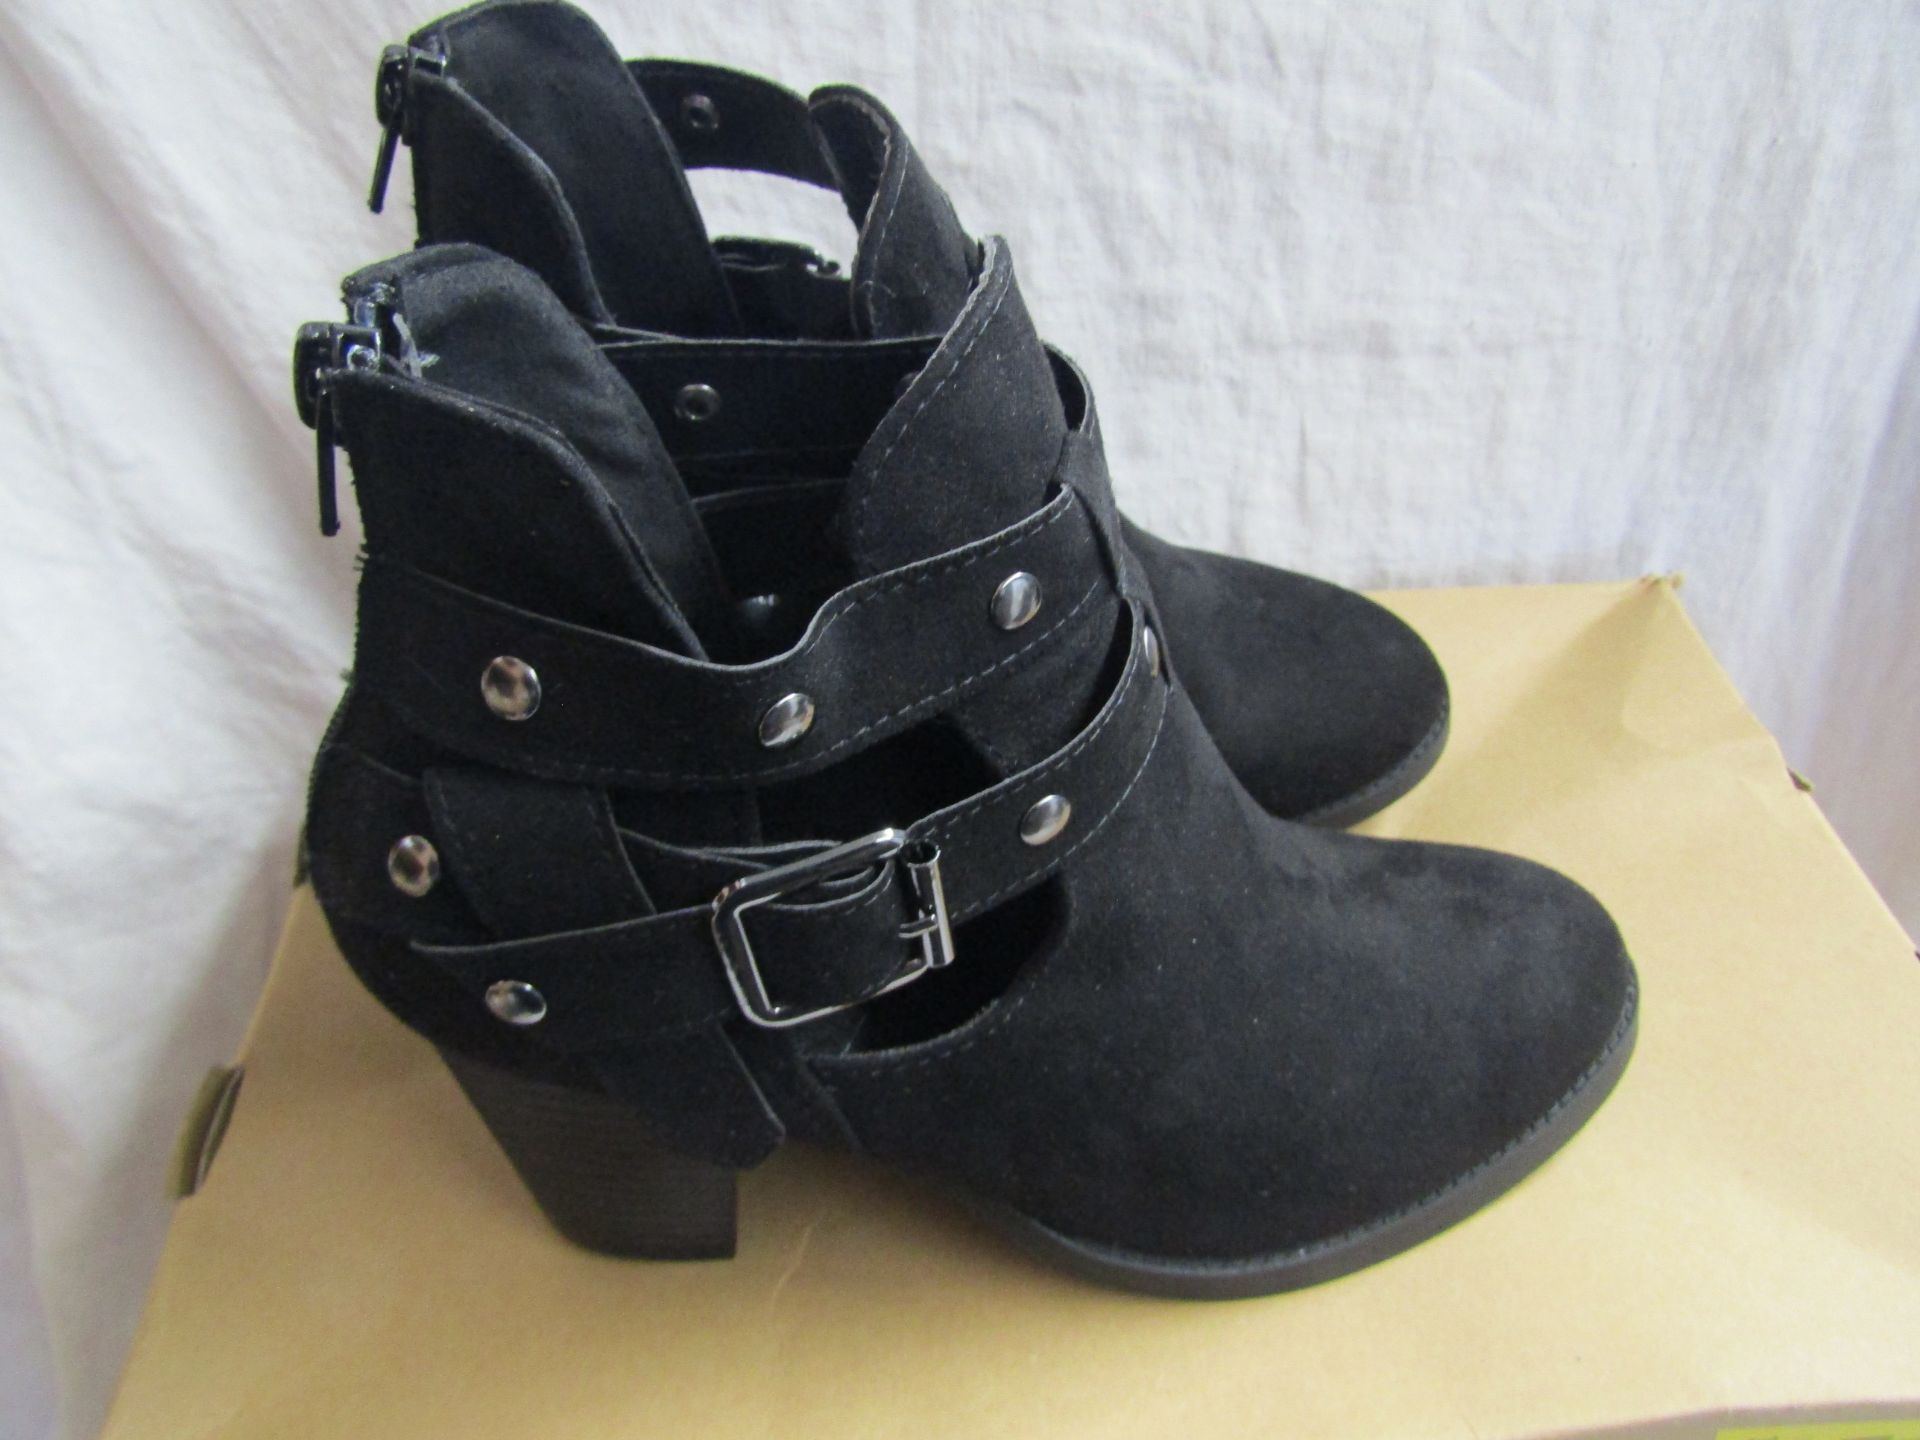 Lascana Ankle Boot Black Size 4 ( May Have Worn Once Very Light Wear )